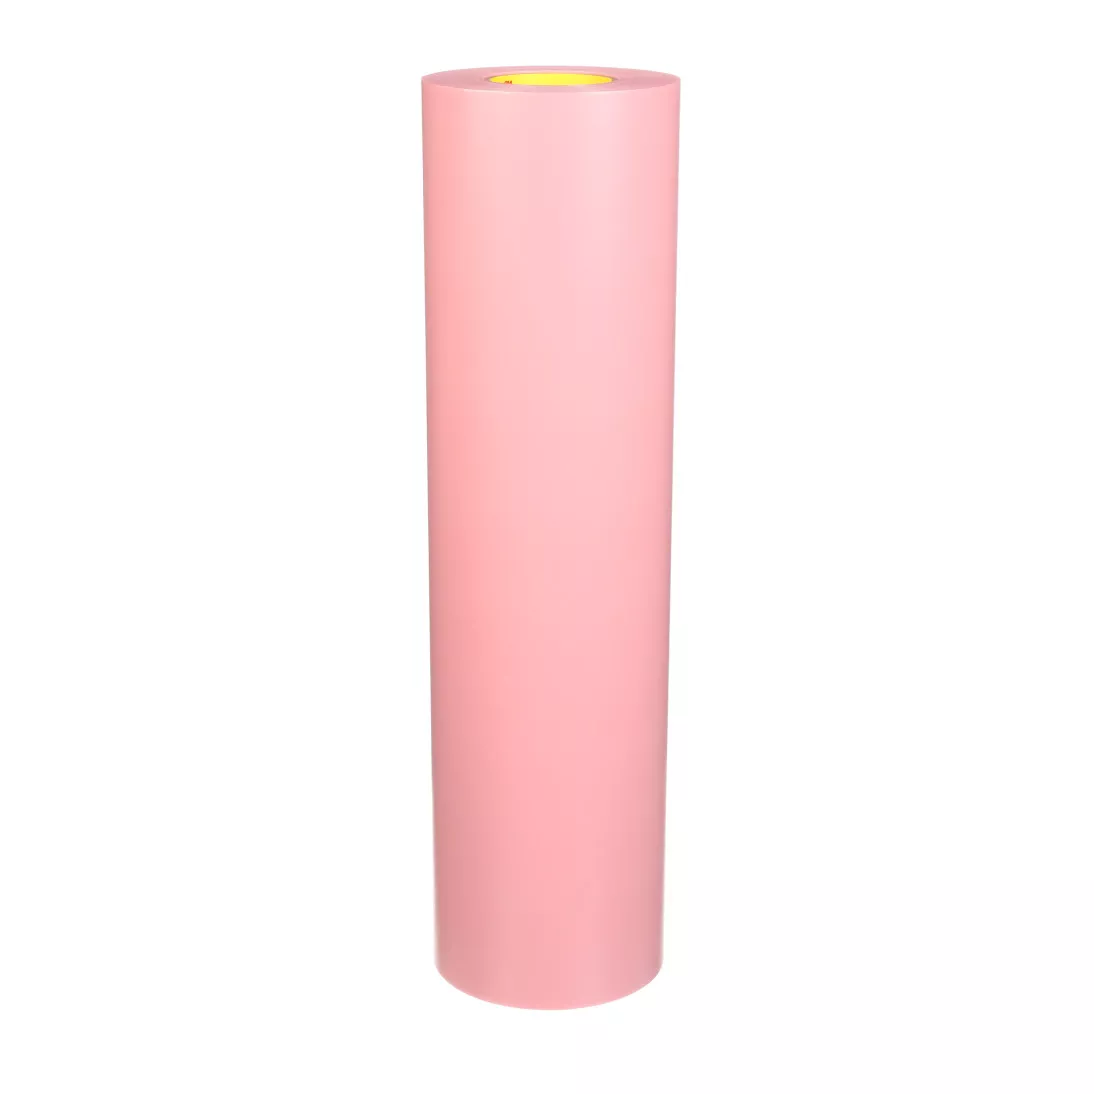 3M™ Cushion-Mount™ Plus Plate Mounting Tape E1920HS, Pink, 54 in x 25
yd, 20 mil, 1 roll per case